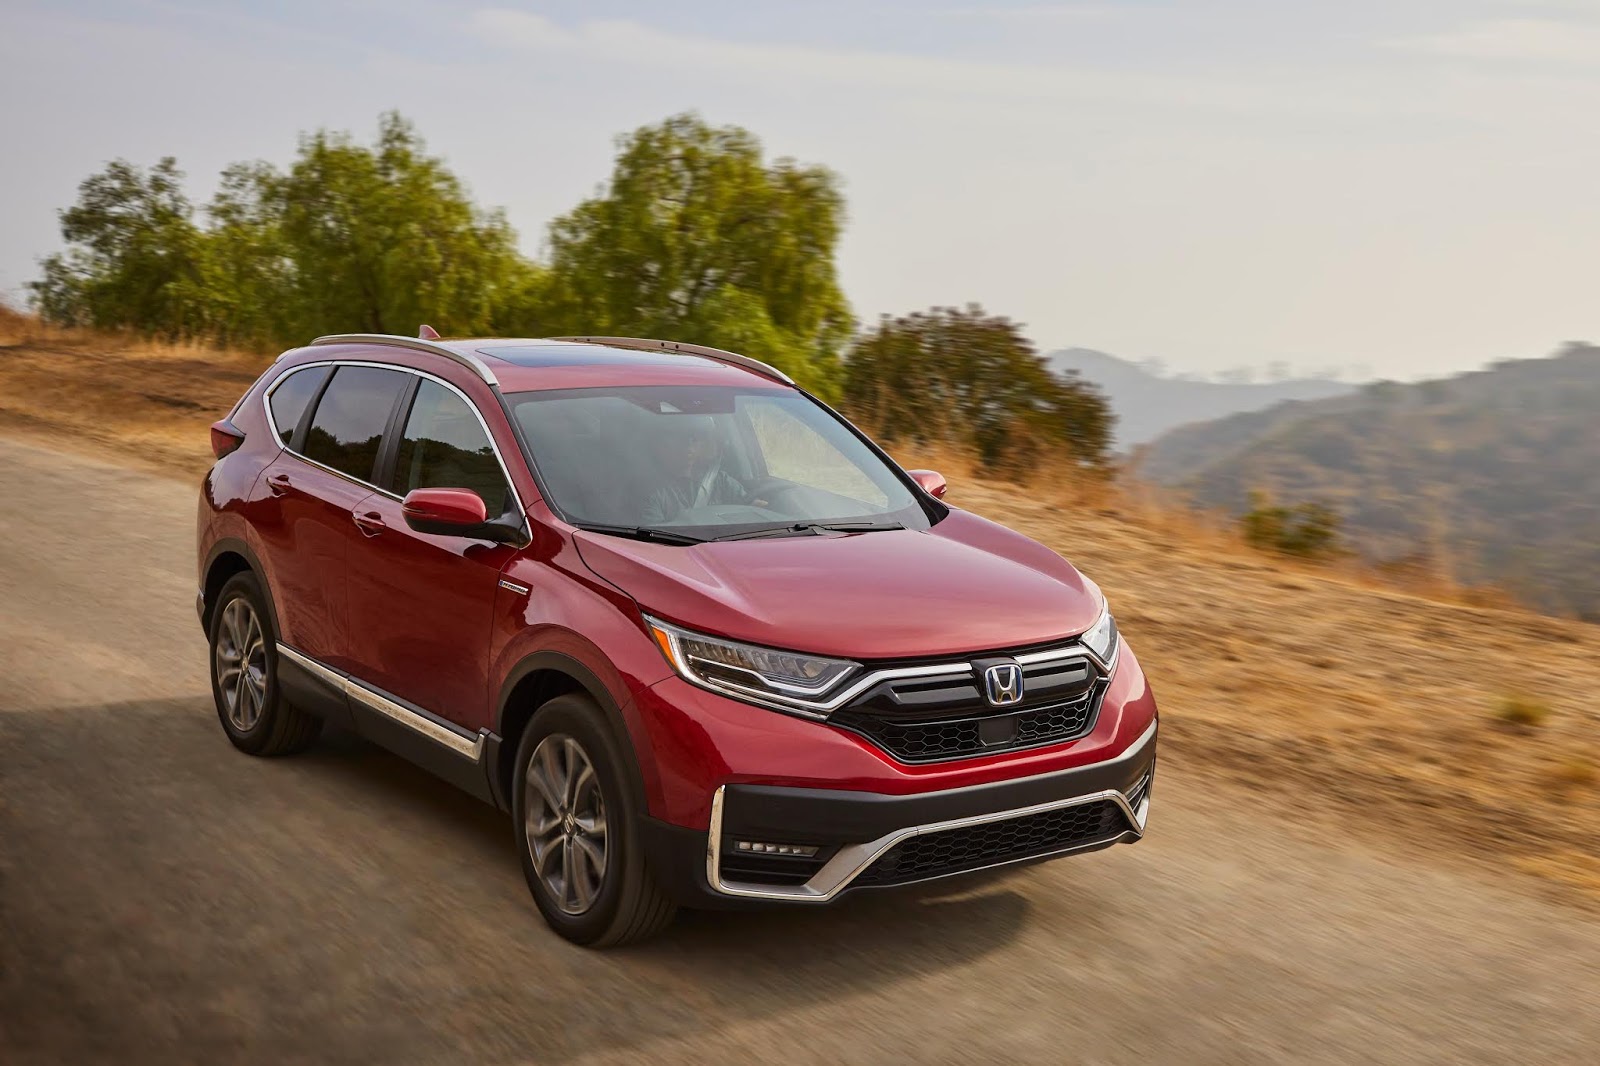 2020 Honda CRV Hybrid Arriving at Dealerships as the Most Powerful